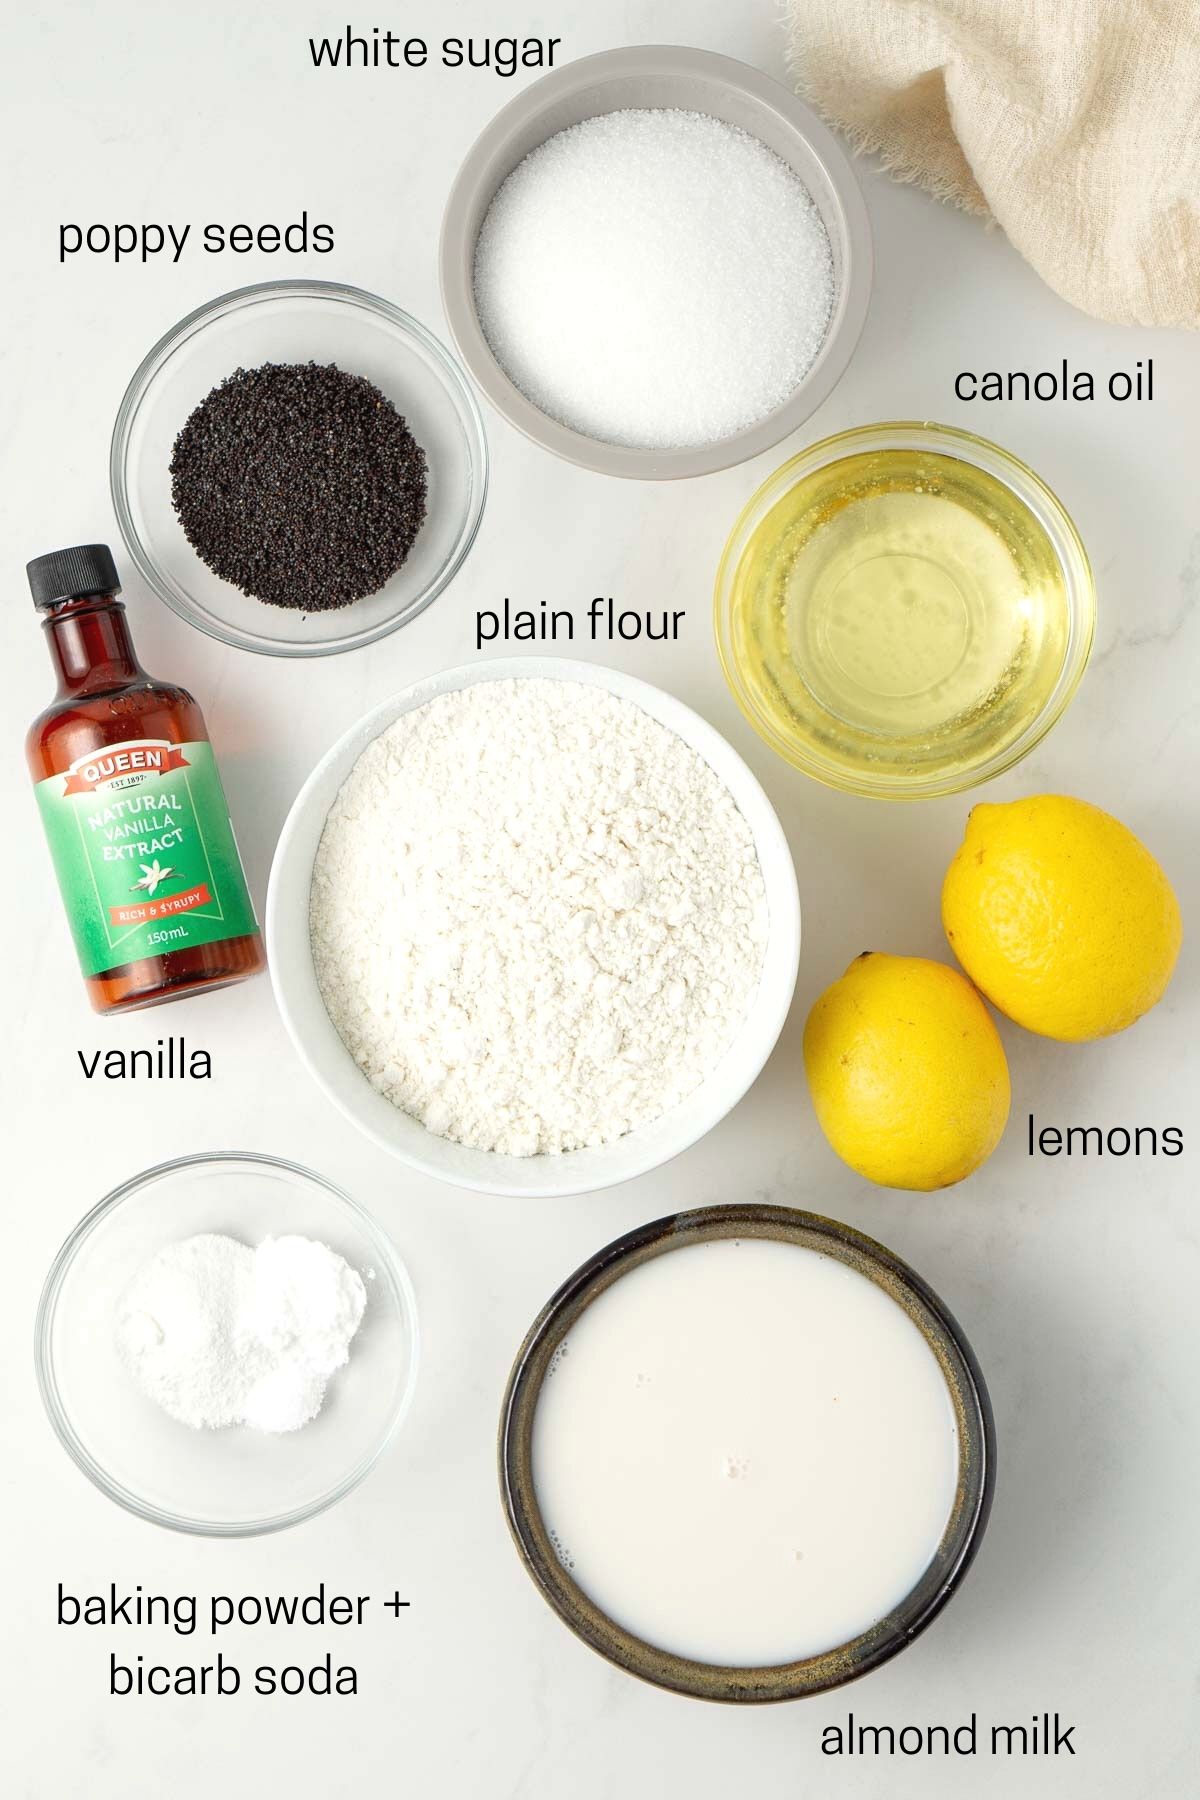 All ingredients needed for lemon poppy seed cake laid out in small bowls.